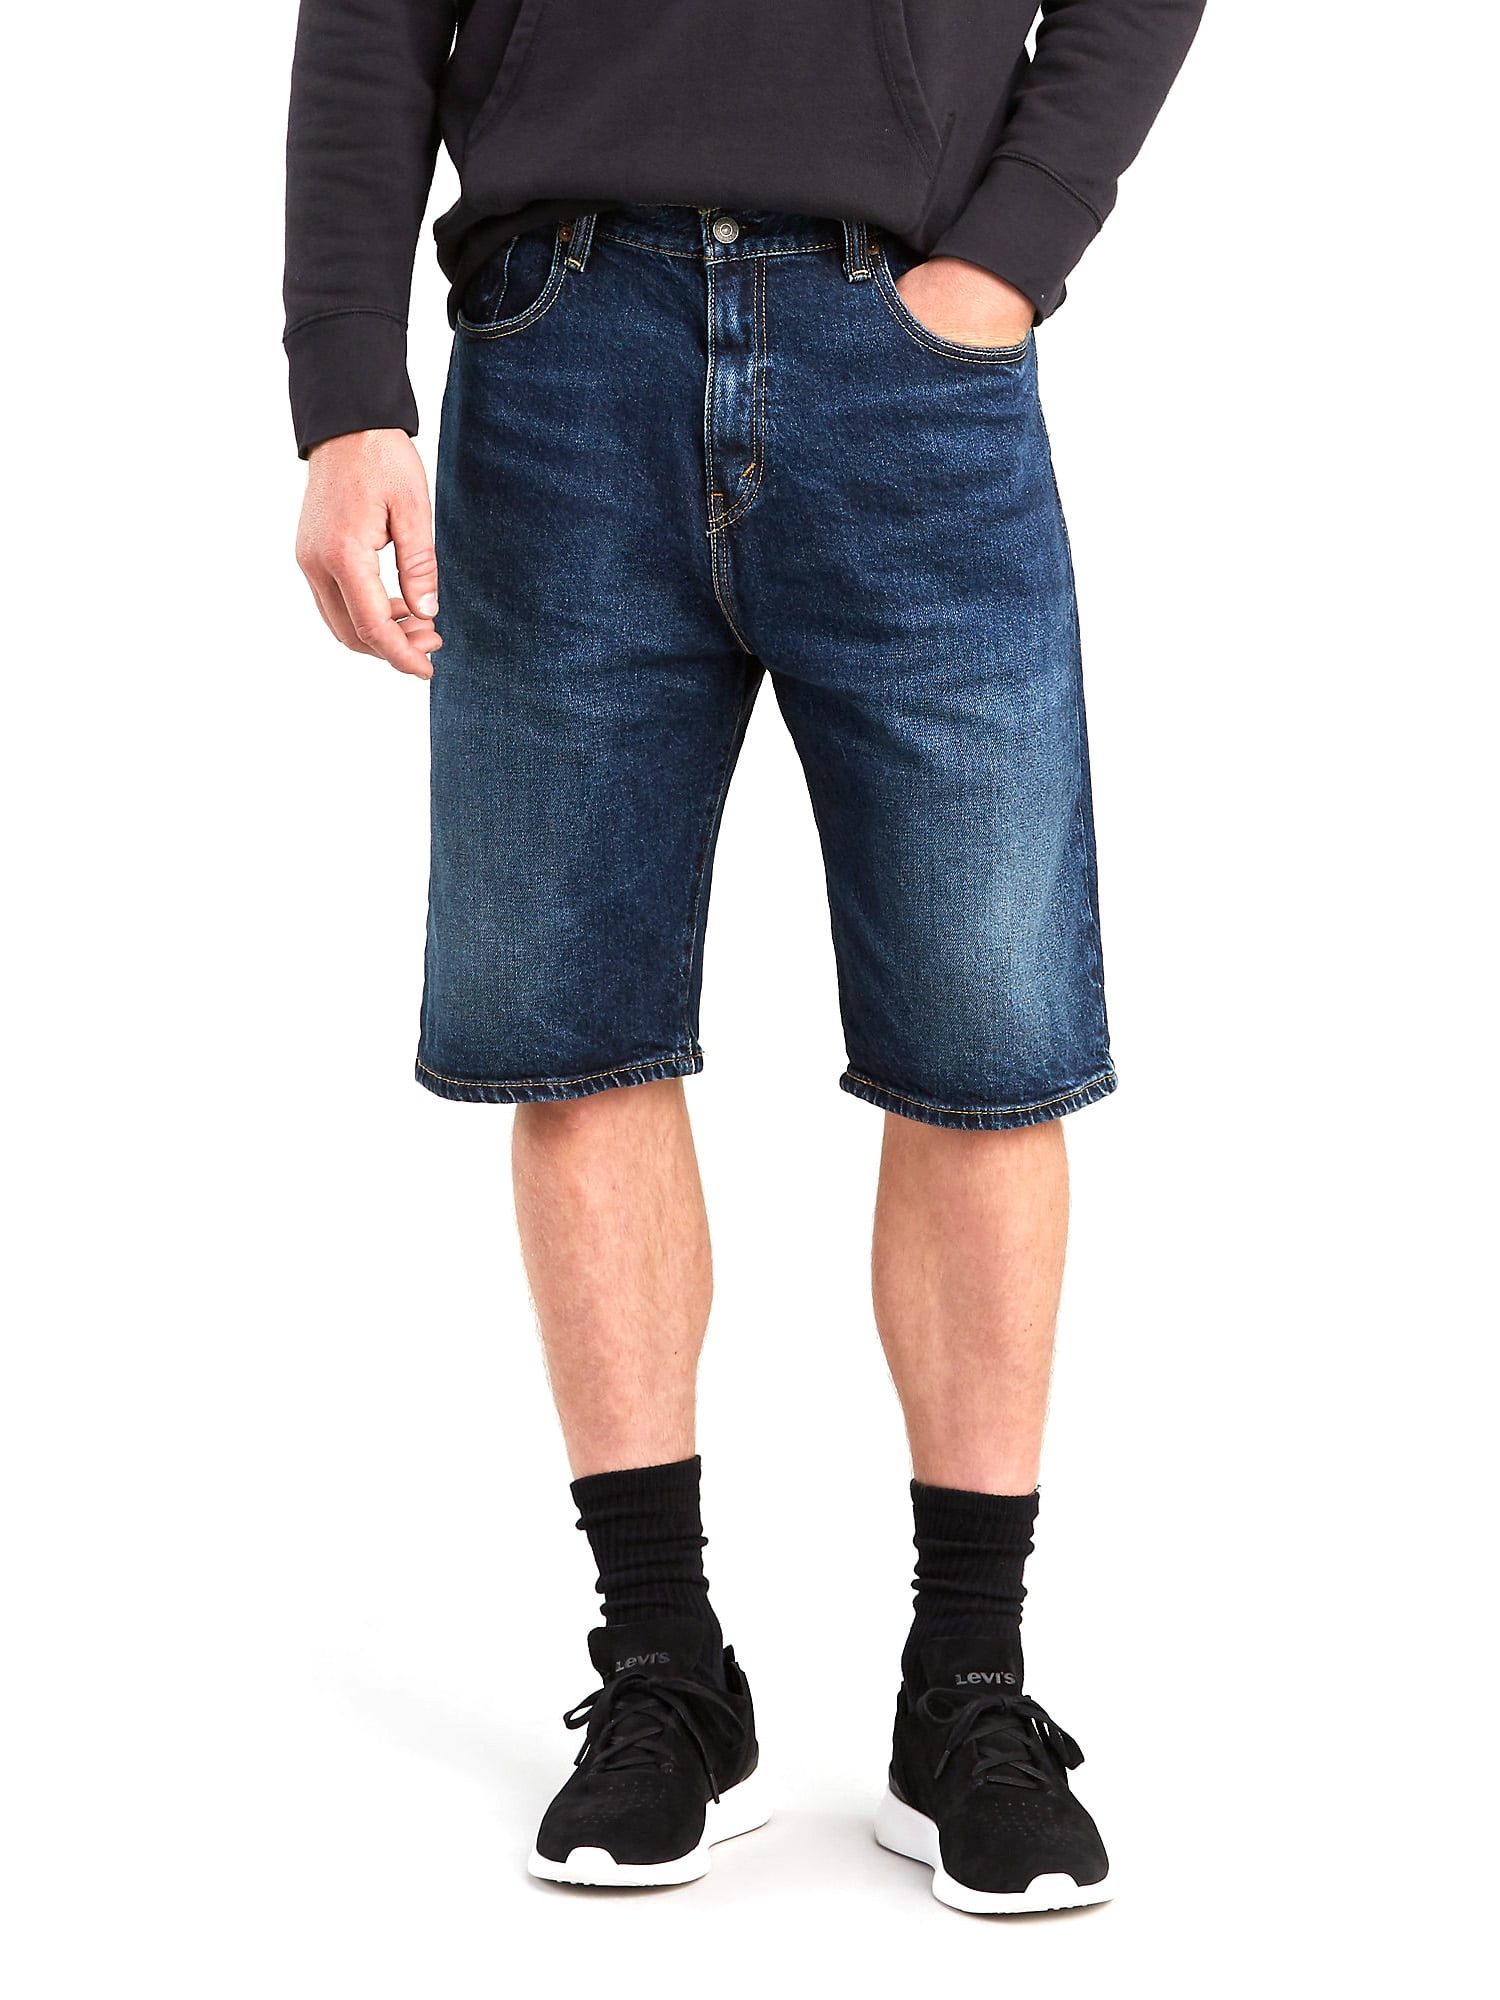 levis 569 big and tall shorts